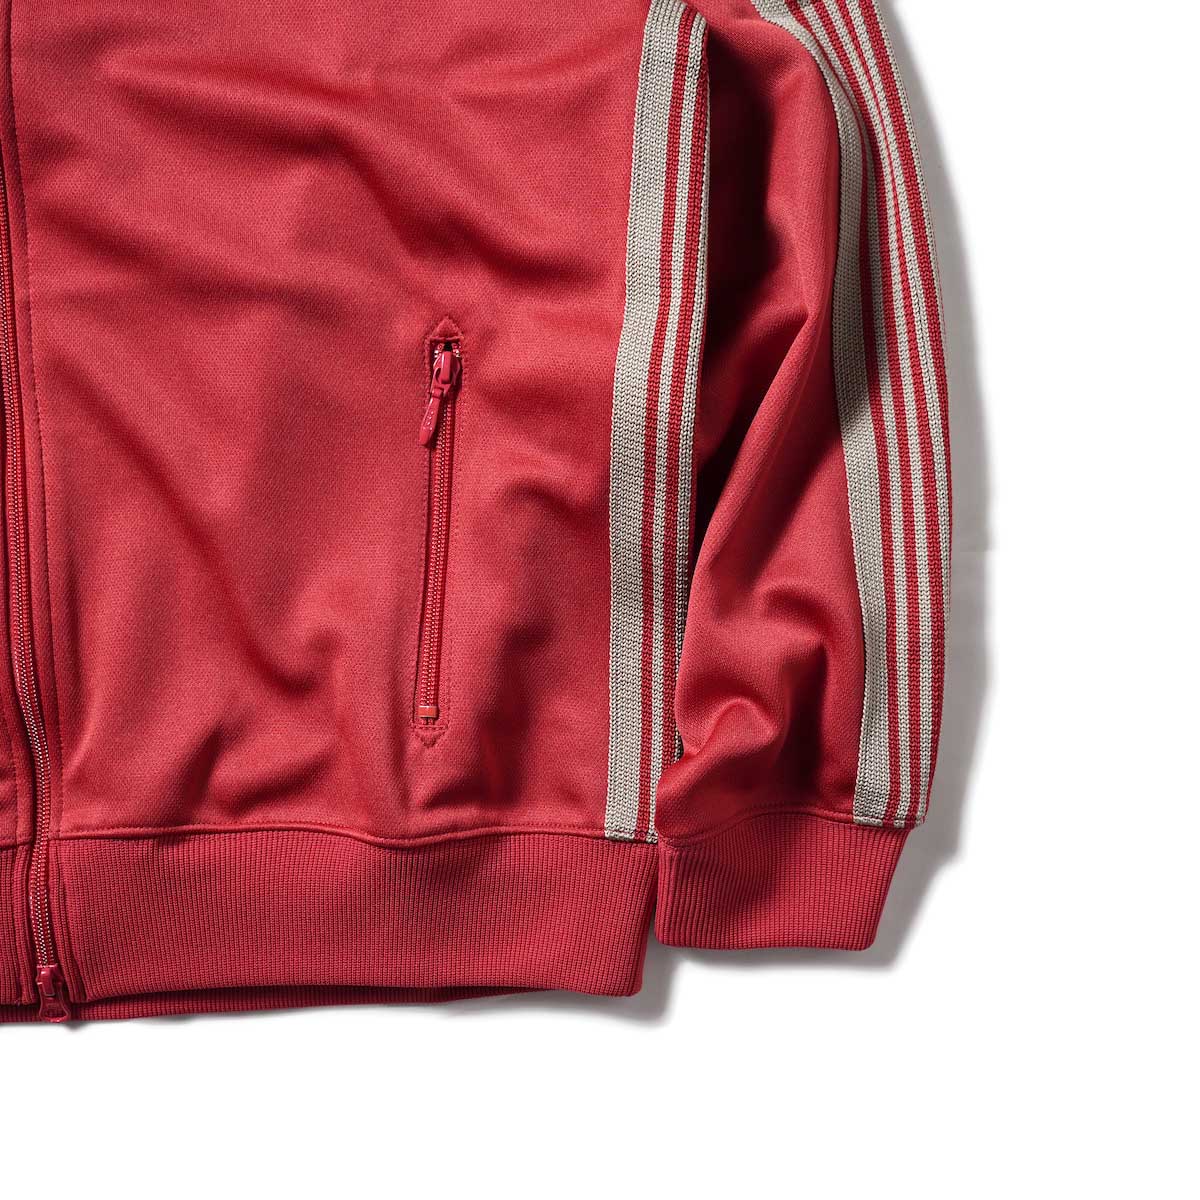 Needles / TRACK JACKET - POLY SMOOTH (Red)袖、裾